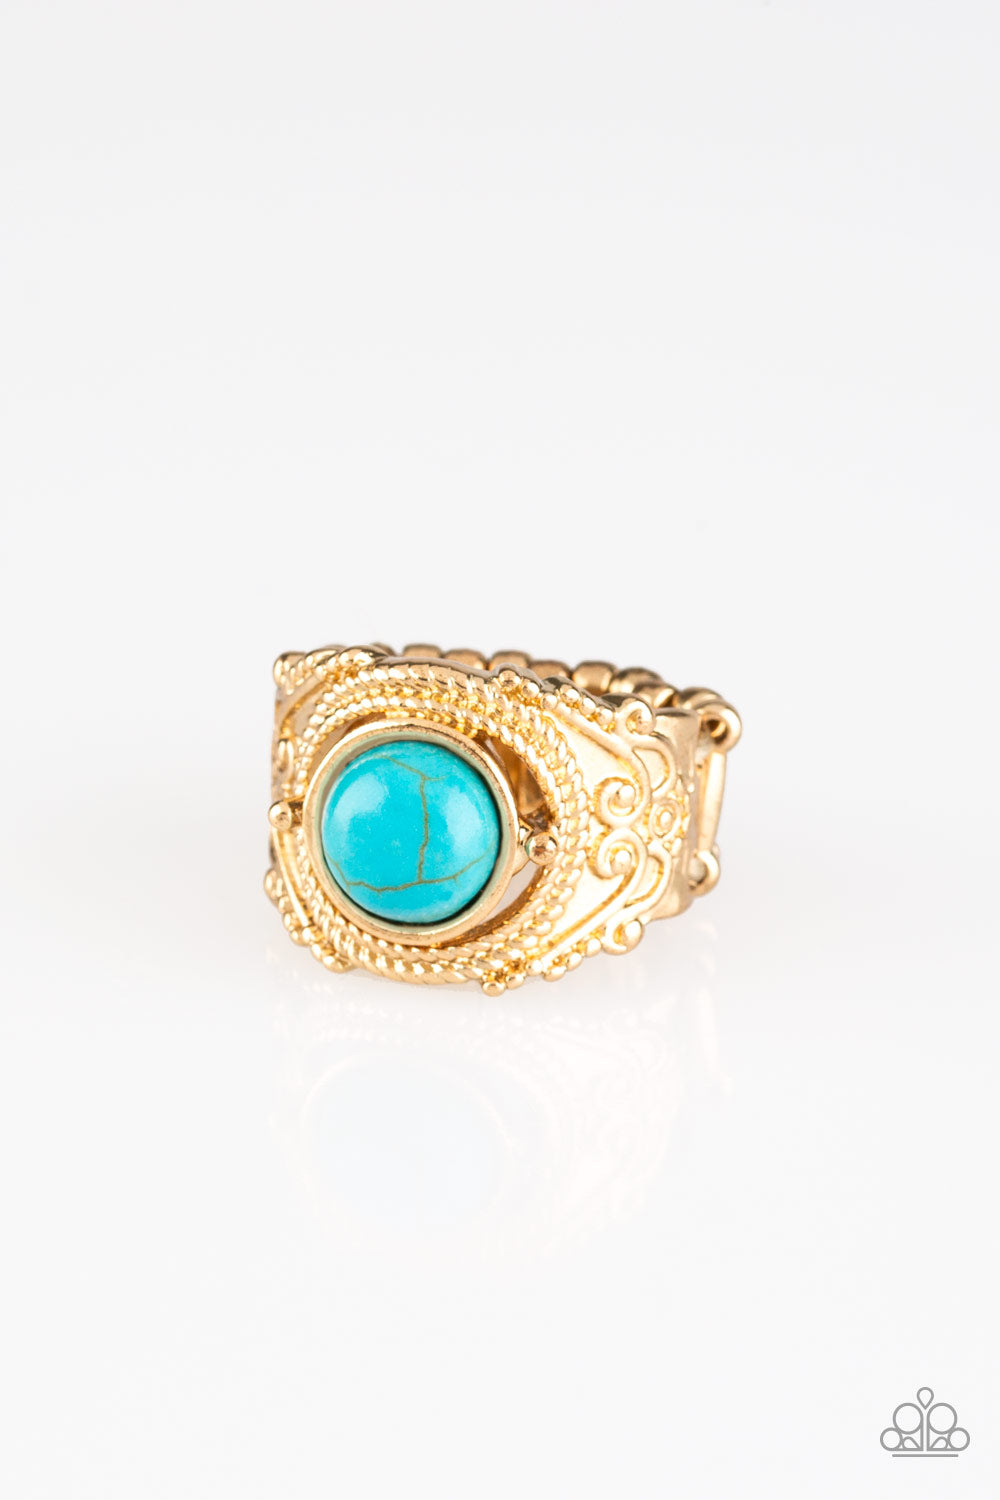 Paparazzi Stand Your Ground - Gold - Blue Turquoise Stone - Ring - $5 Jewelry with Ashley Swint